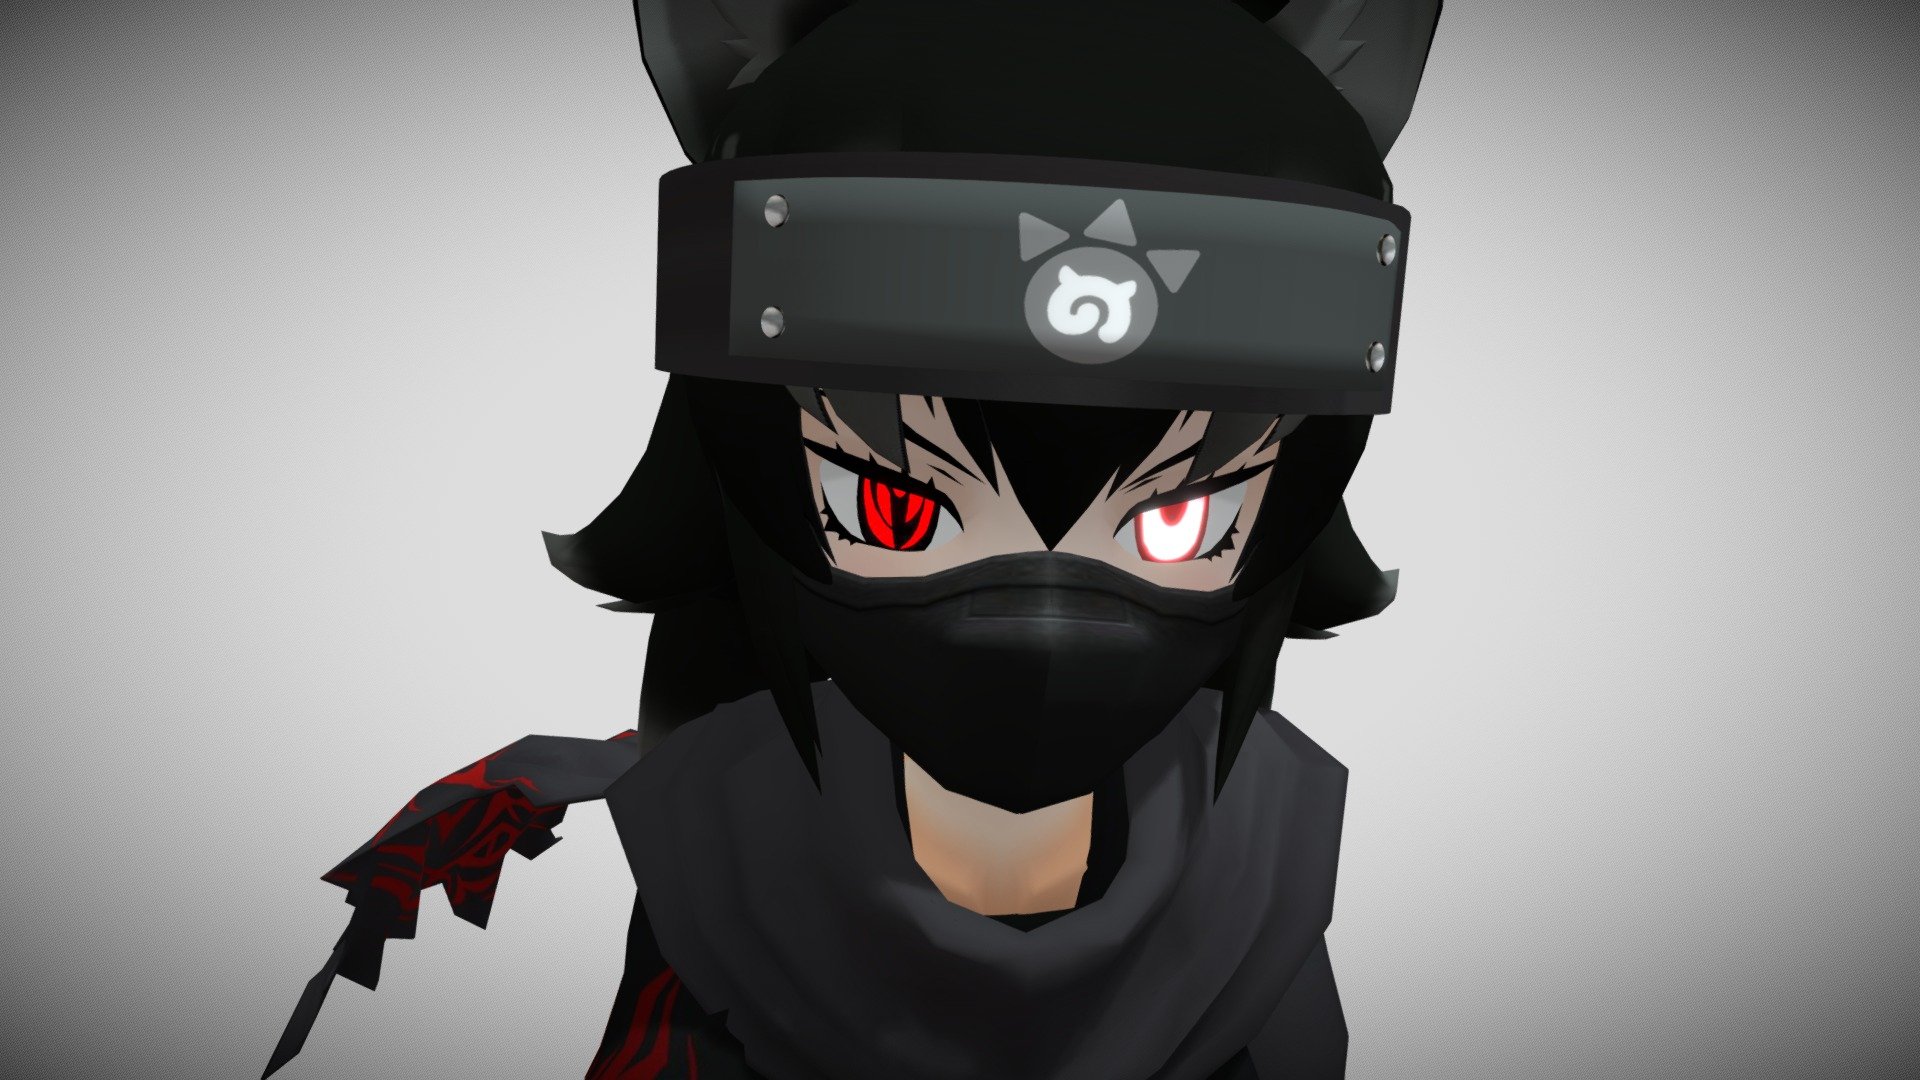 Shinokami Akatsuki 3d Model By Nemikaiser Nemi Kaiser 695670a Sketchfab #vrchat #vrchat avatar #mmd #mmd model #unity #blender #it was over 70k but 70k is the limit so i had to delete somerhing so it should be 69k big now #but it loads so uhh yeah #personal. shinokami akatsuki 3d model by